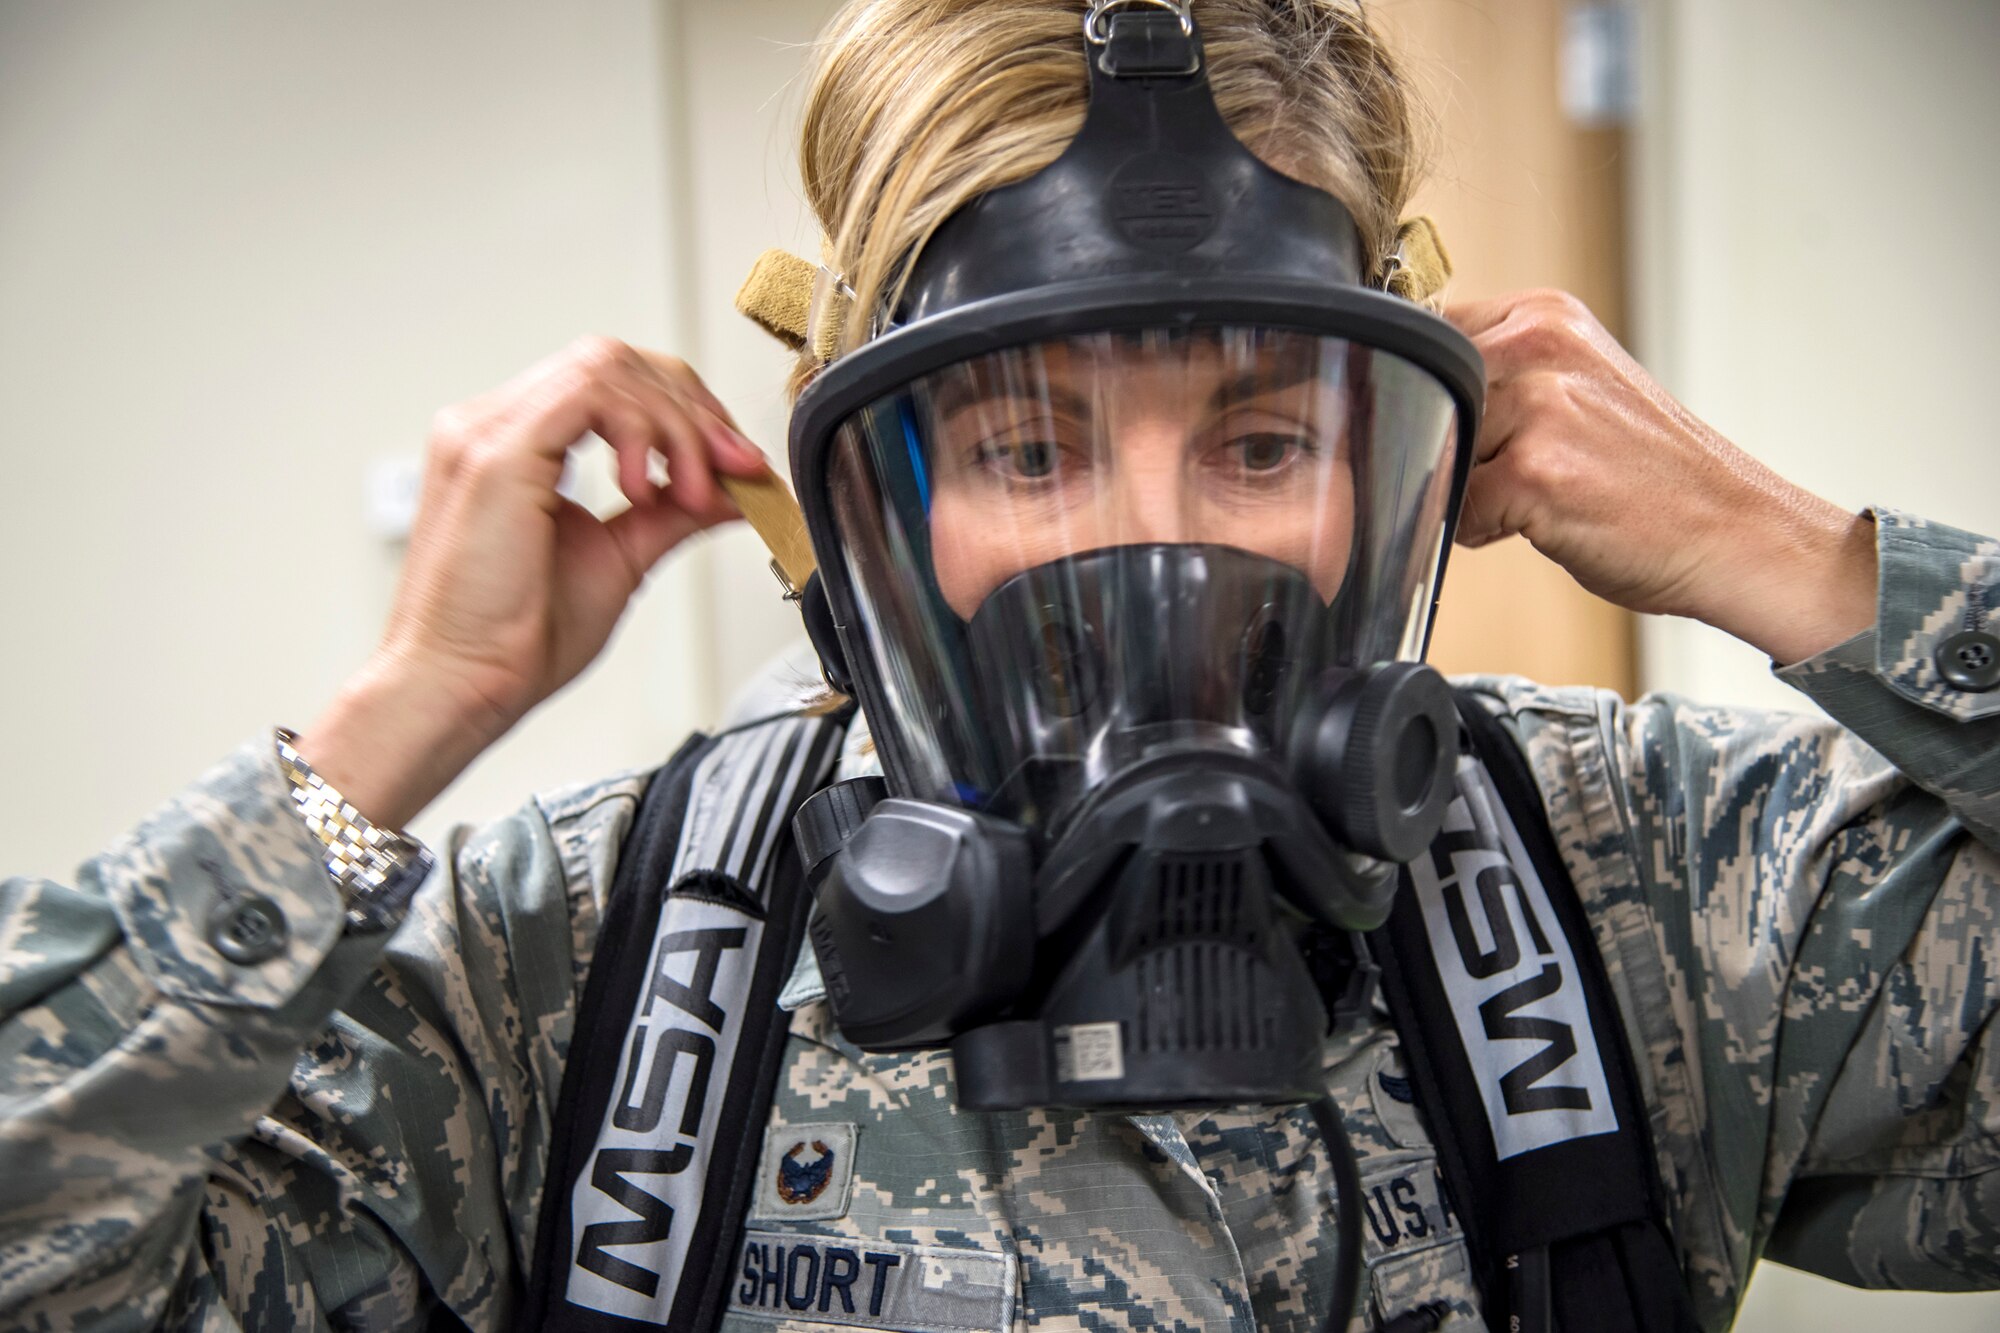 Col. Jennifer Short, 23d Wing commander, tightens a gas mask, April 30, 2018, at Moody Air Force Base, Ga. Short toured the 23d Medical Group to gain a better understanding of their overall mission, capabilities, and comprehensive duties, and was able to experience the day-to-day operations of the various units within the 23d MDG, ranging from bioenvironmental to ambulatory care. (U.S. Air Force photo by Airman 1st Class Eugene Oliver)